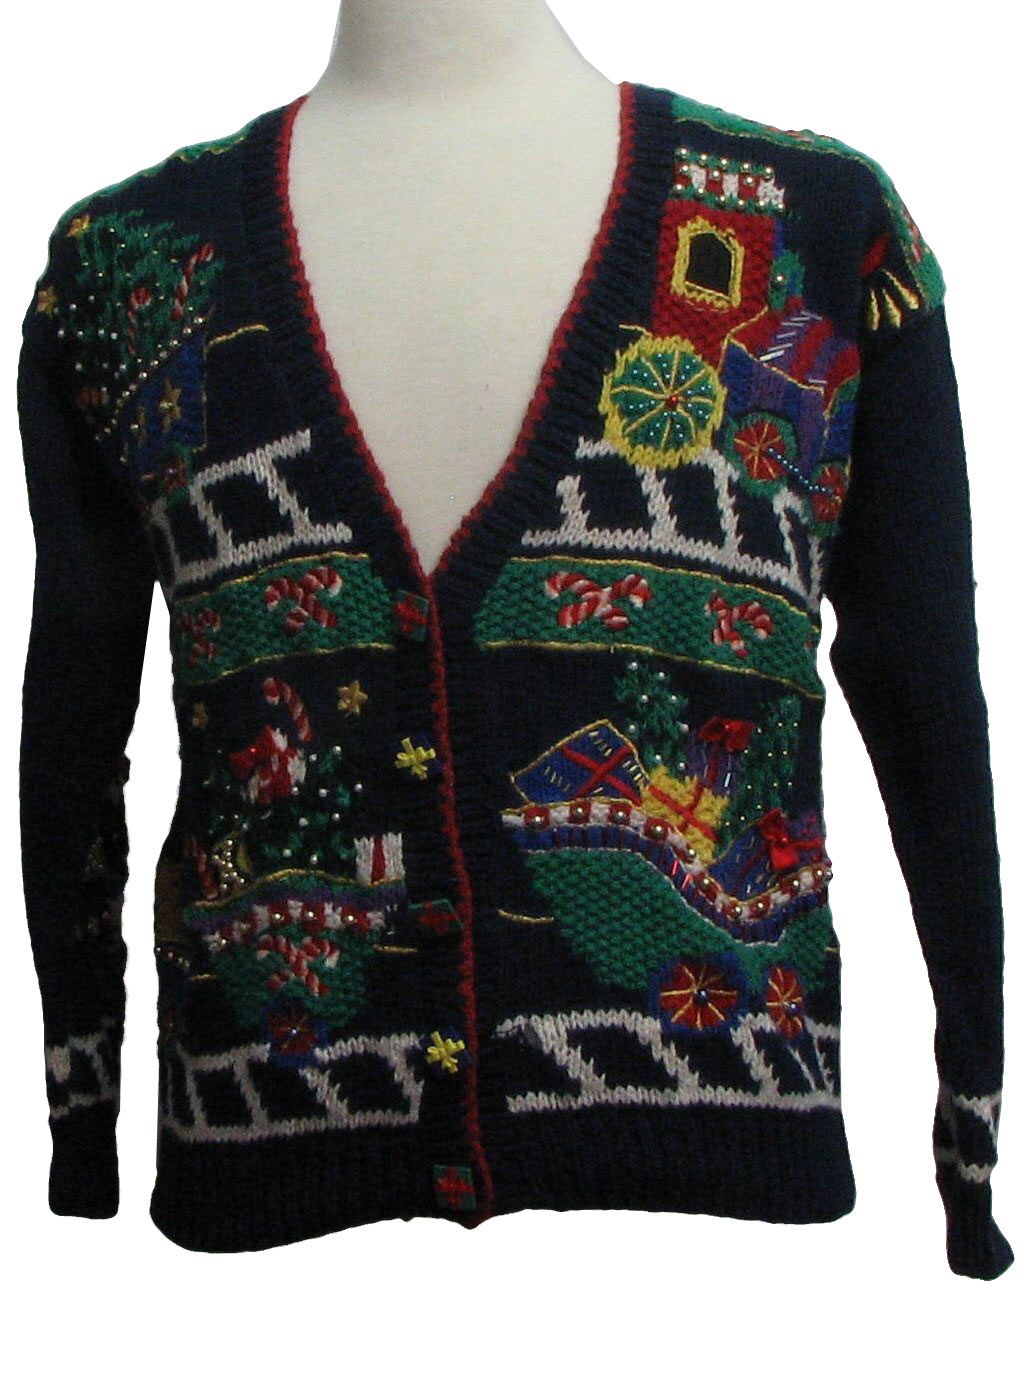 Womens Ugly Christmas Sweater: -Belle Pointe- Womens navy blue ...